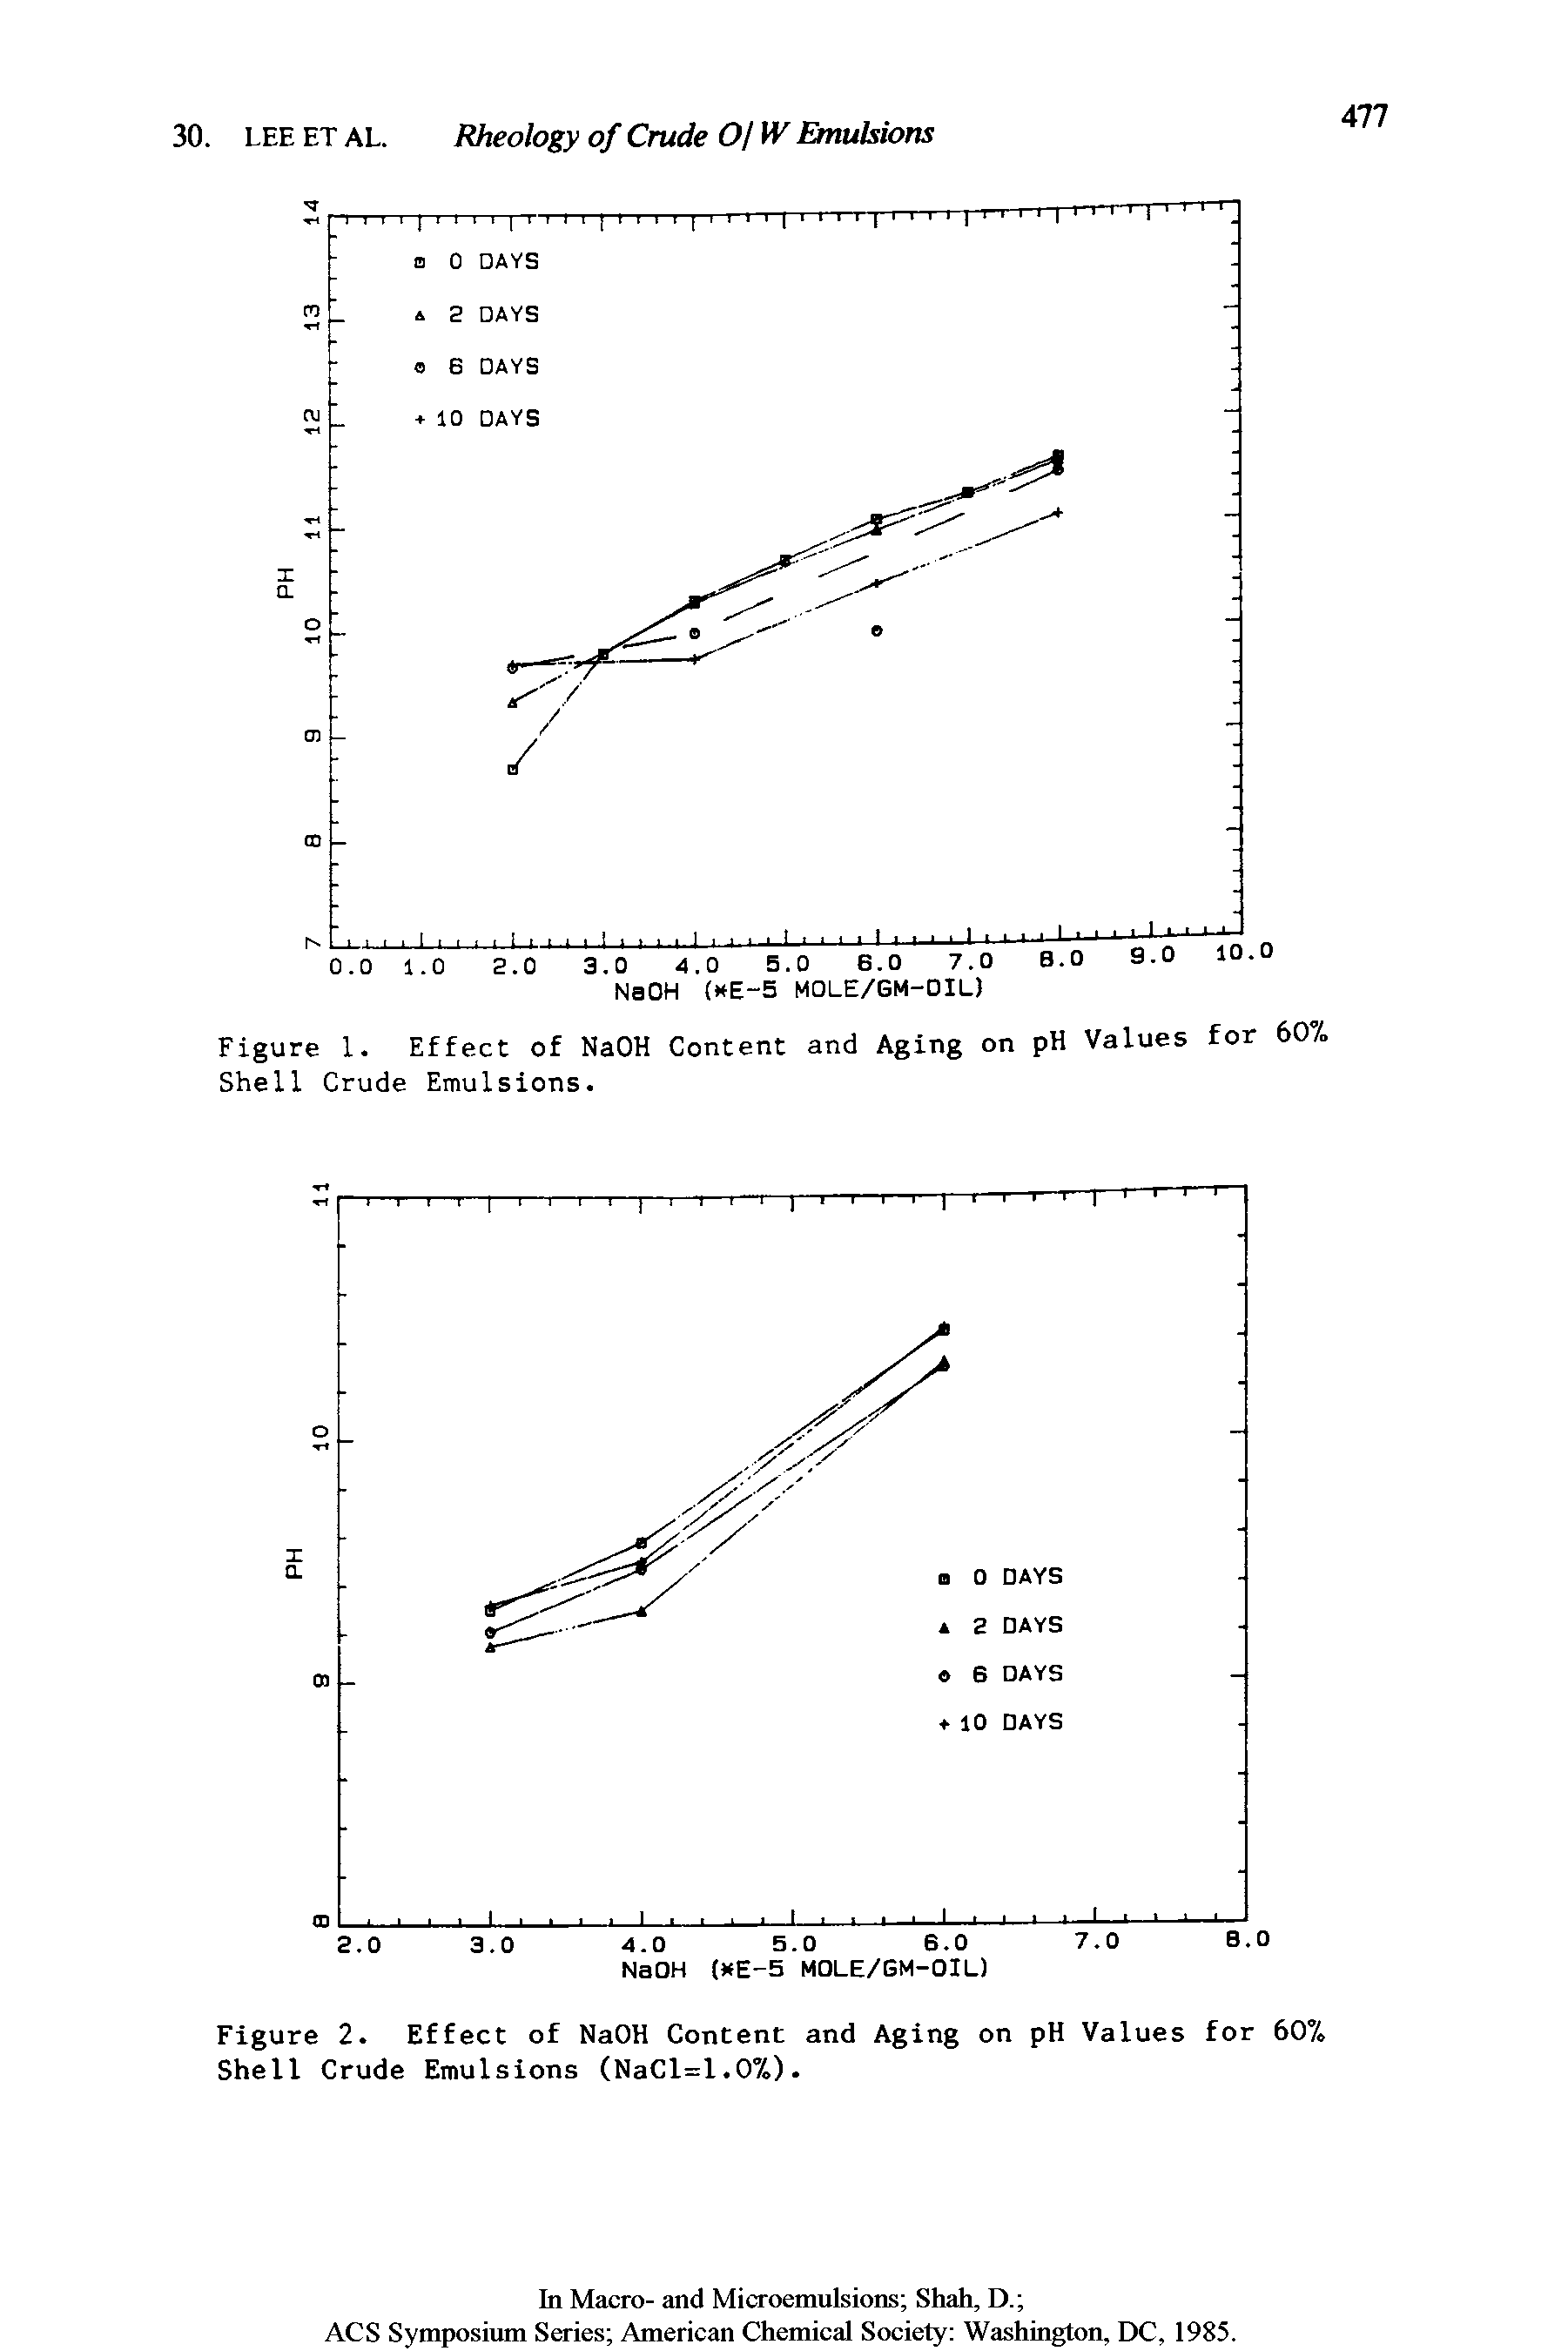 Figure 1. Effect of NaOH Content and Aging on pH Values for 607. Shell Crude Emulsions.